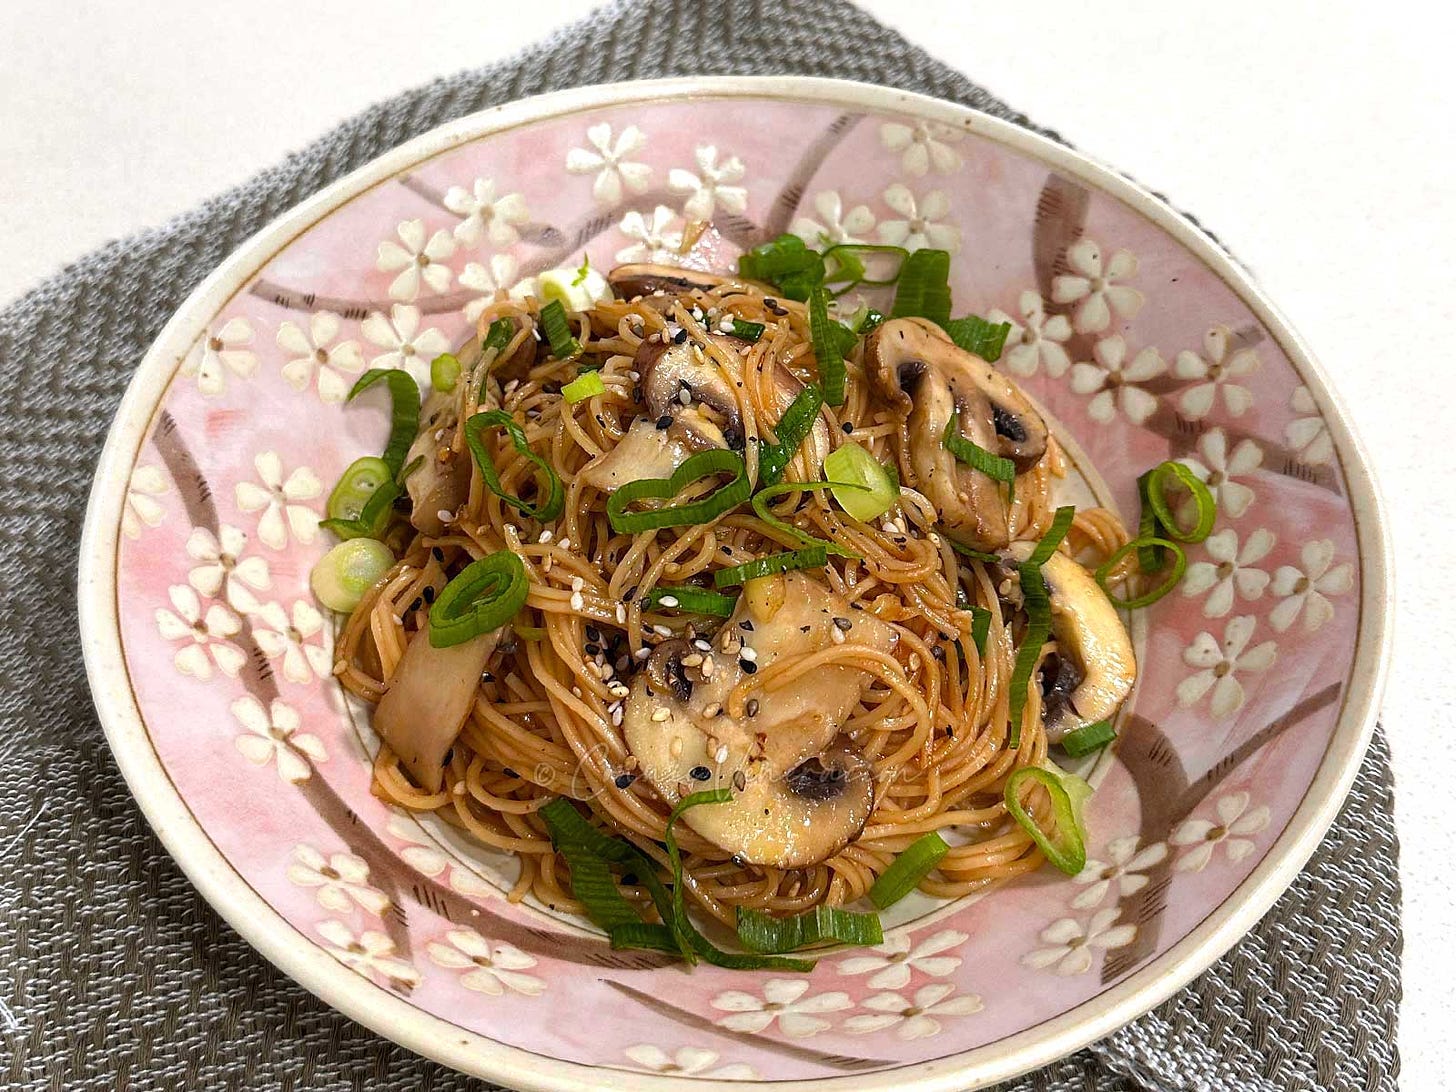 Garlic butter noodles with honey and gochujang